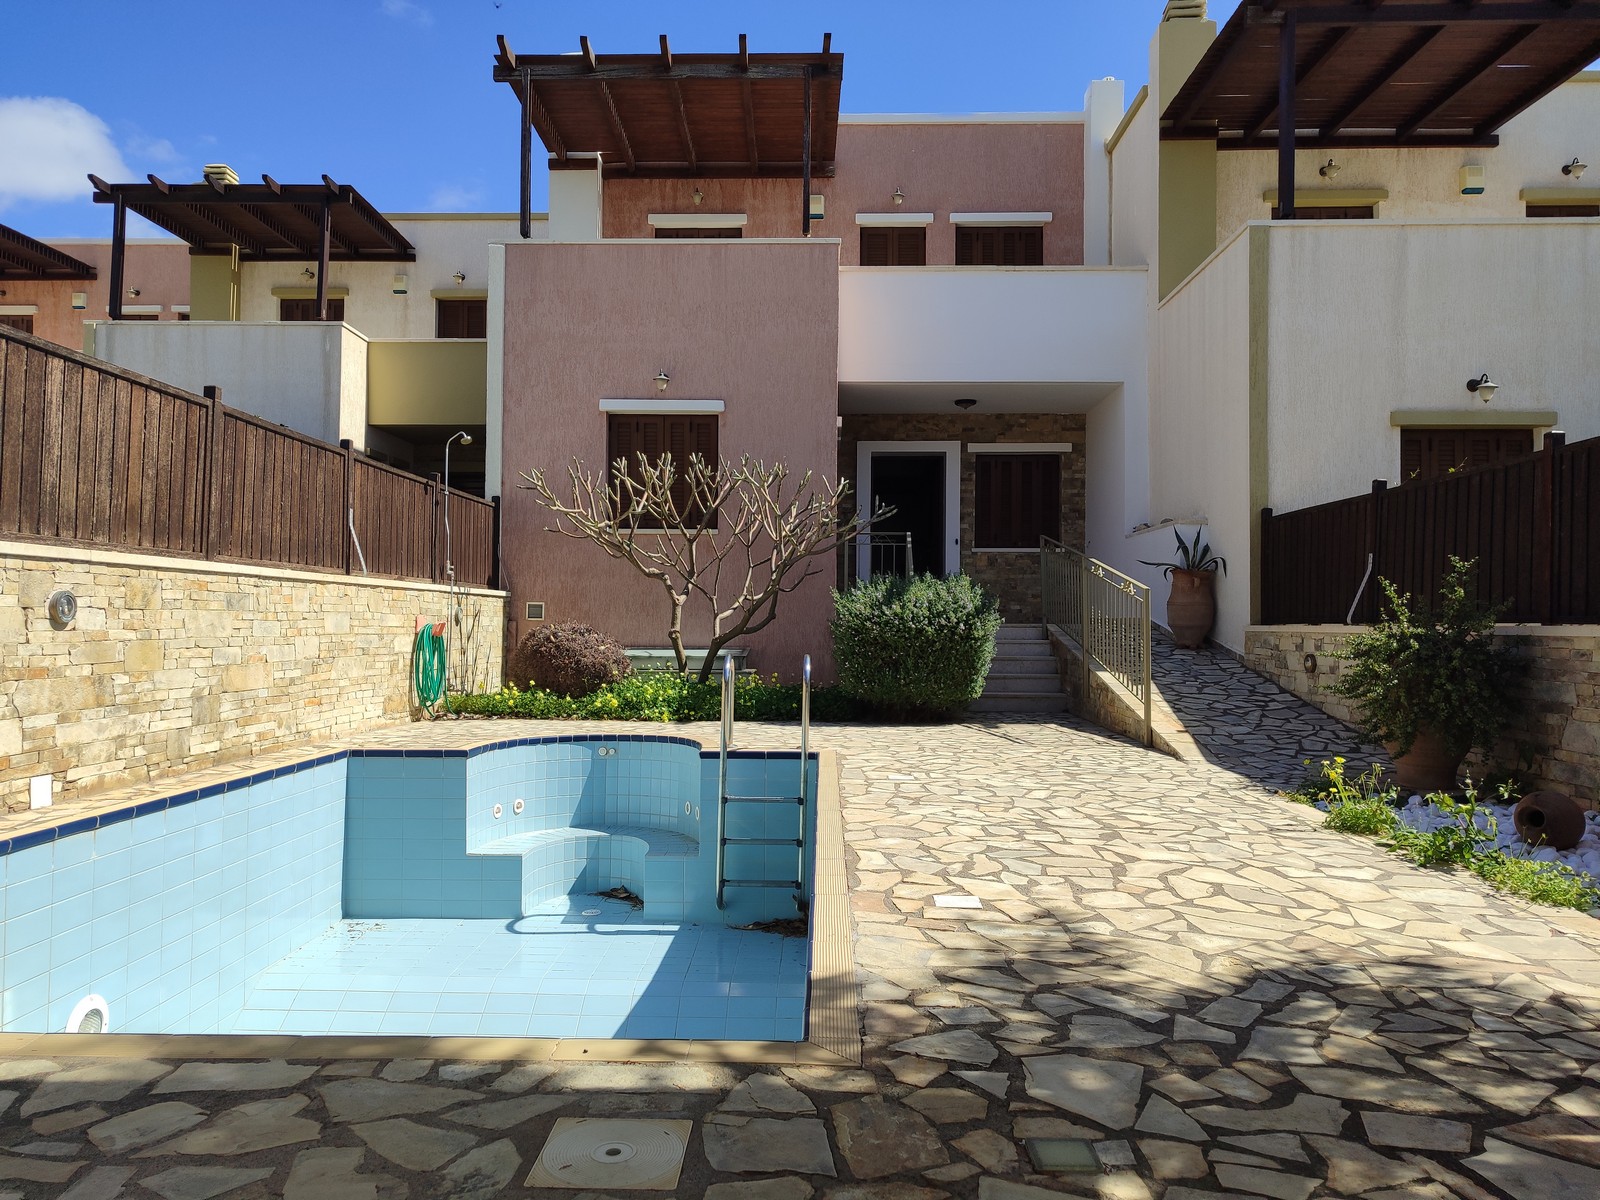 This beautiful 200m2 maisonette sits on a 300m2 plot with a private pool.